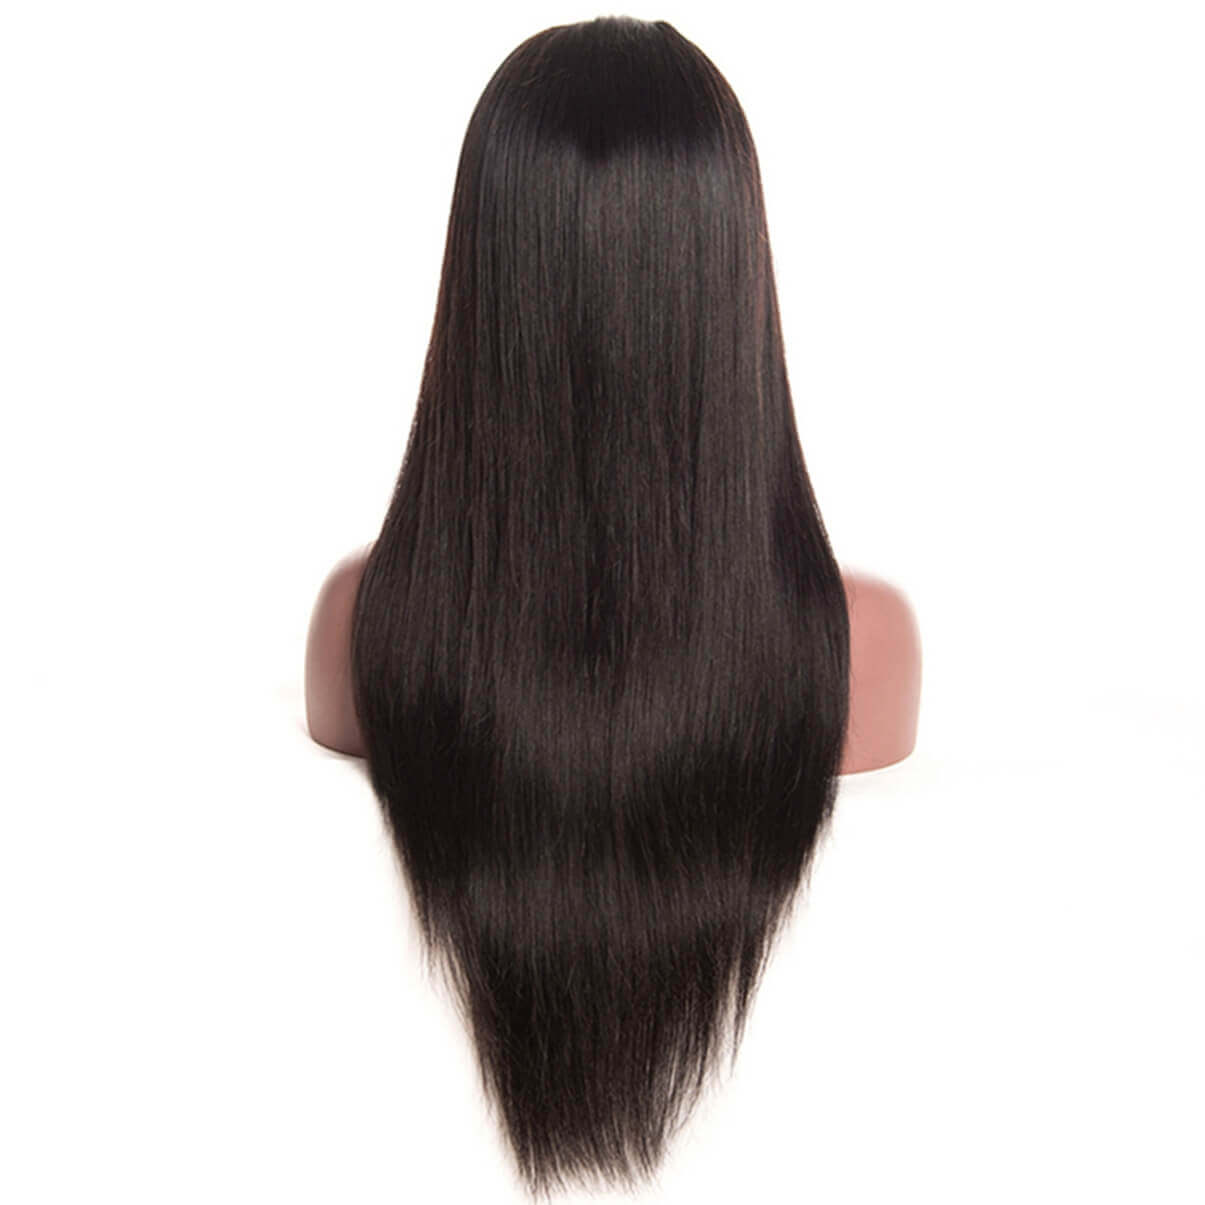 Lakihair 100% Unprocessed Human Hair Silky Straight Lace Front Wigs With Baby Hair